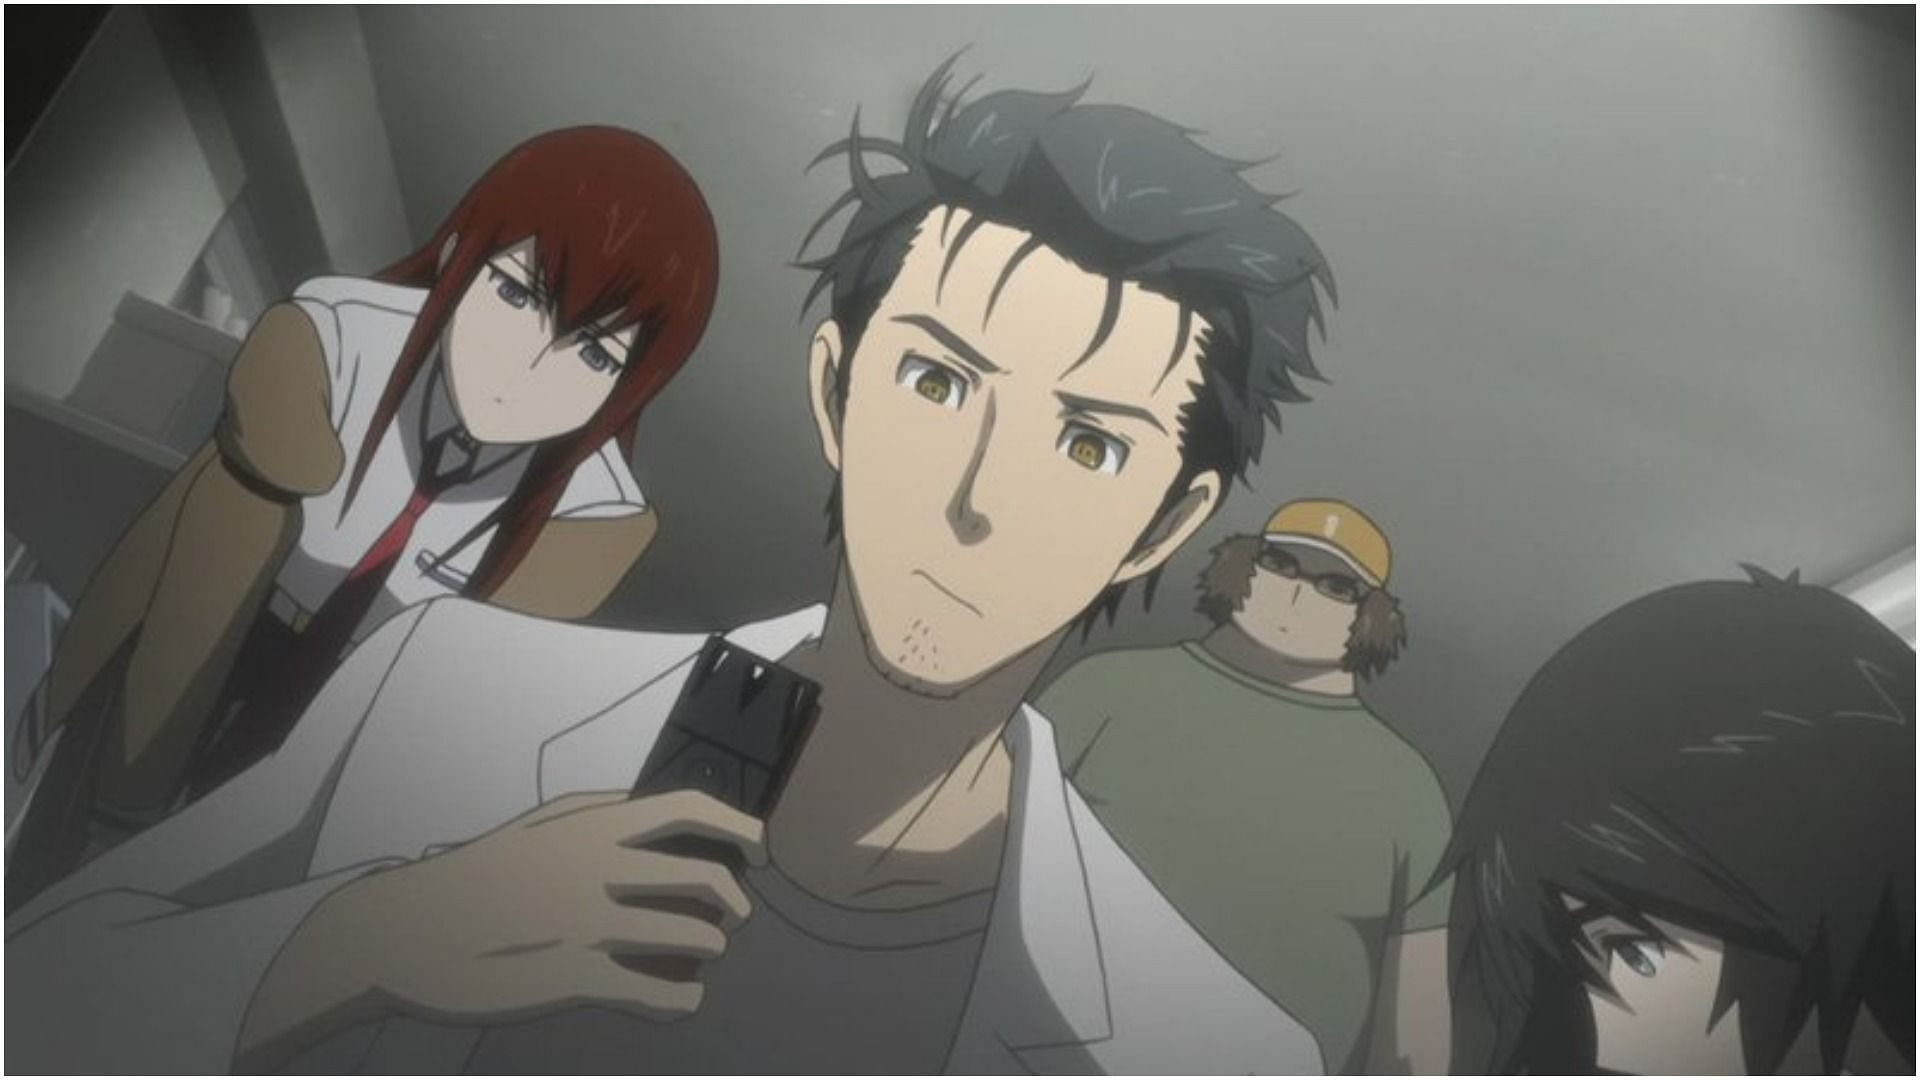 All characters of Steins Gate (Image via White Fox)